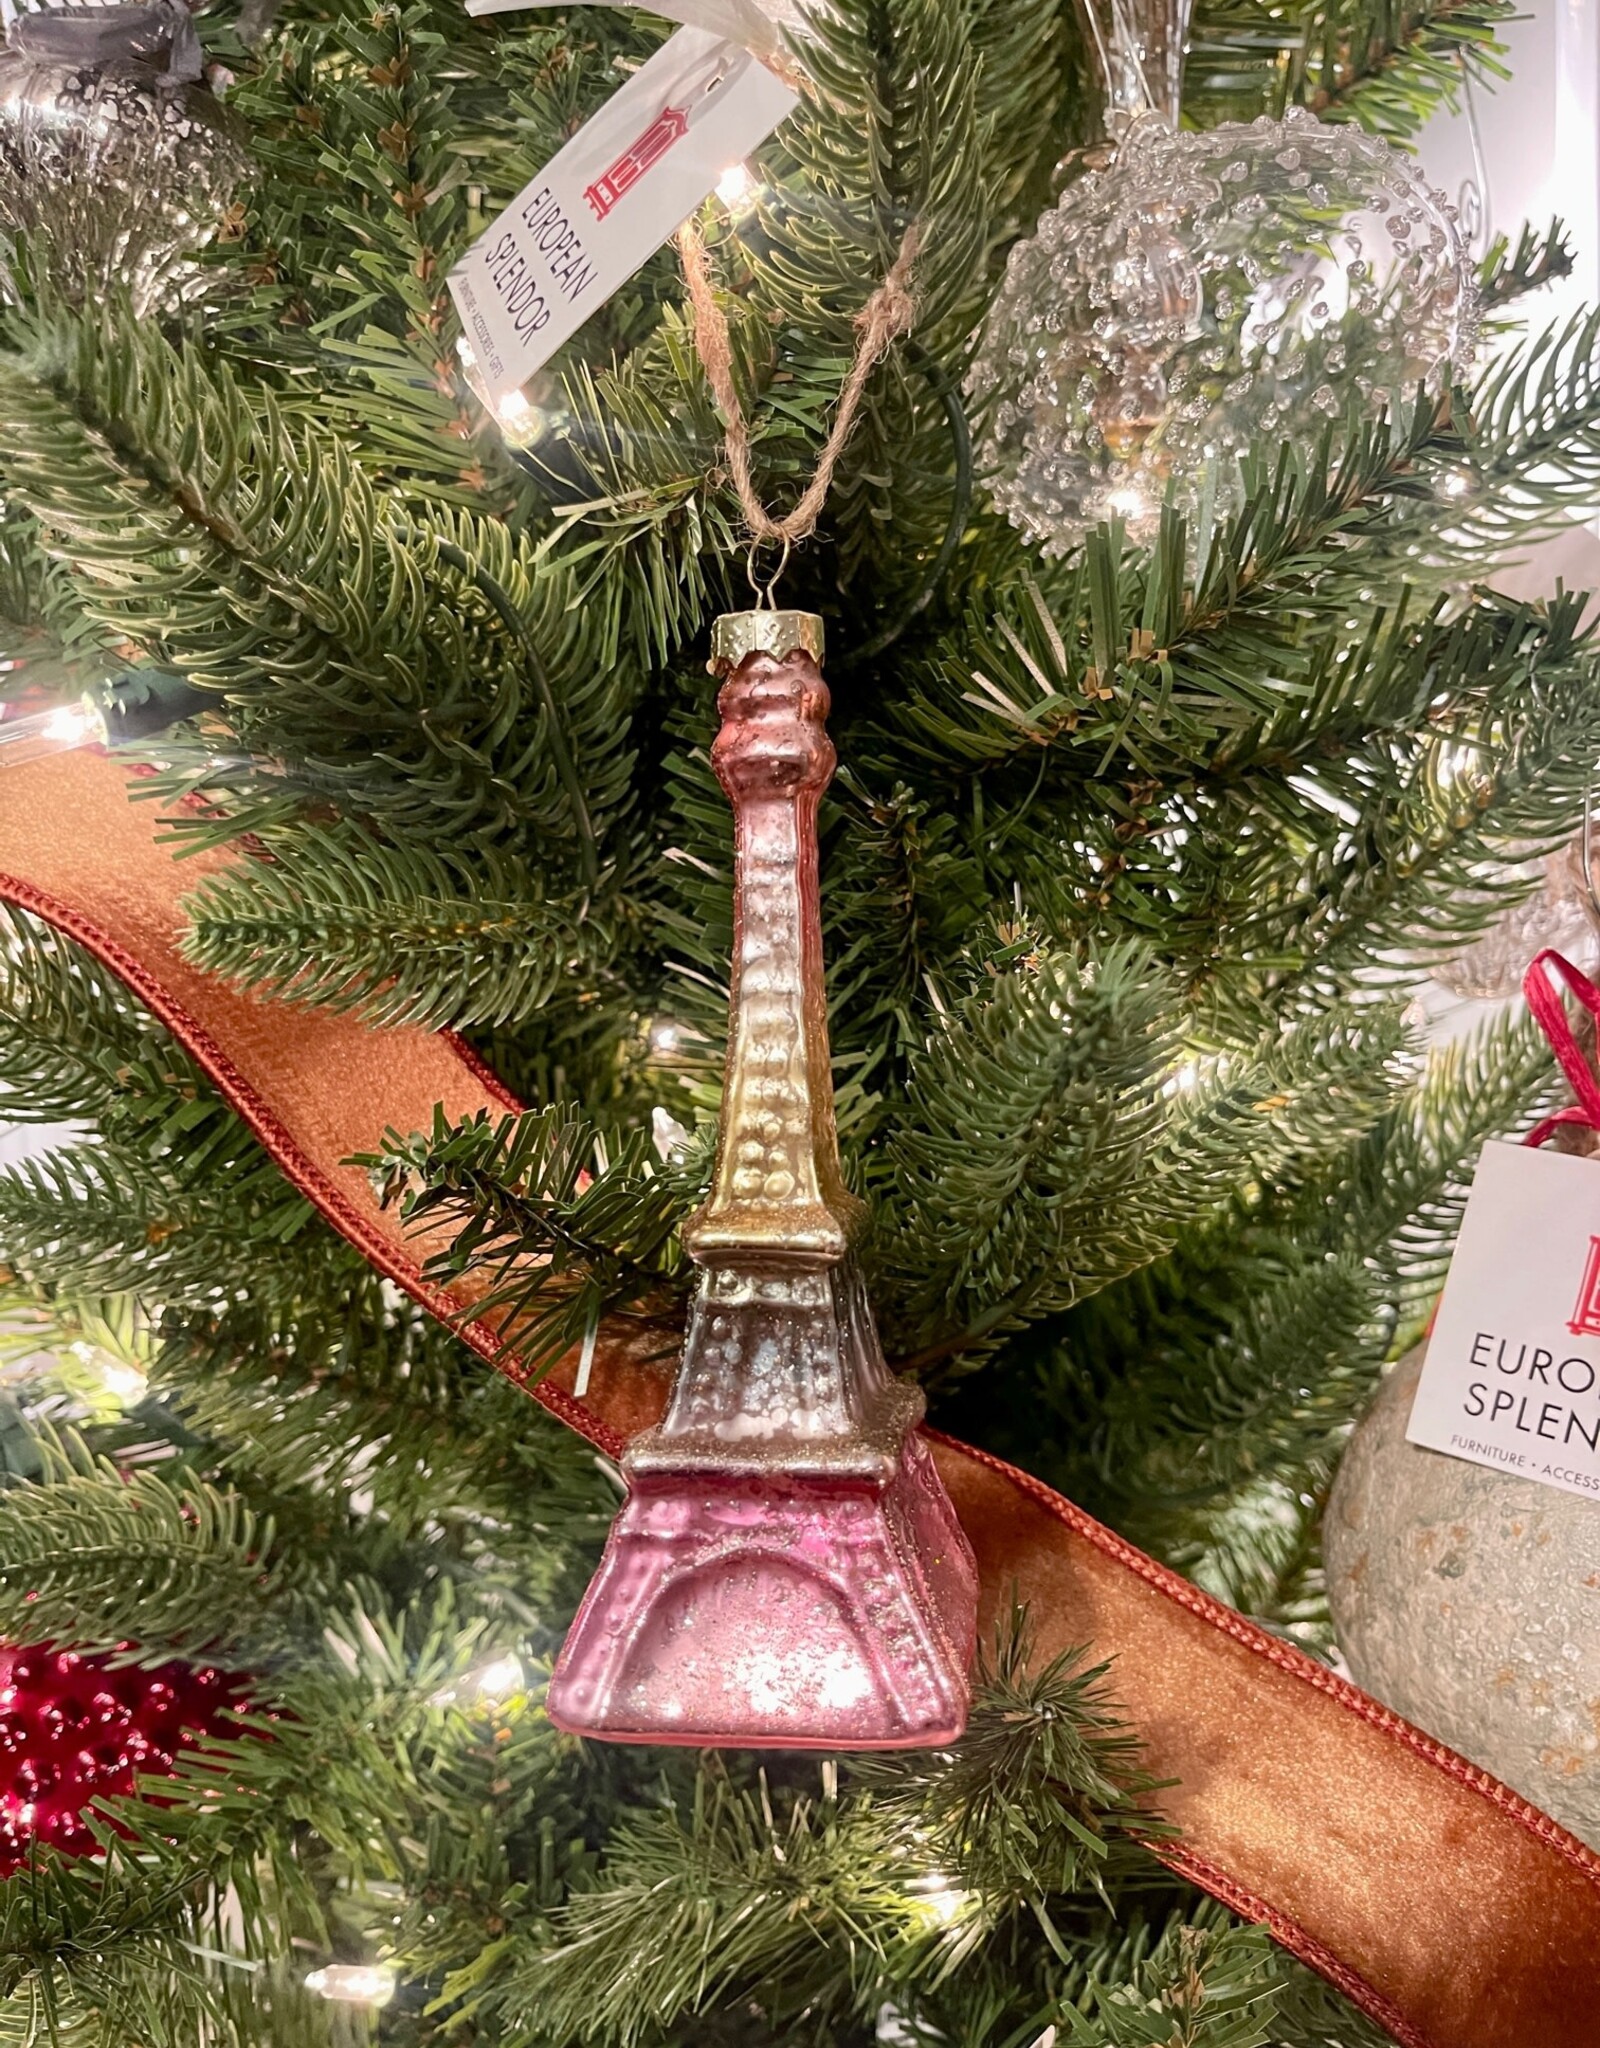 5-1/2"H Hand-Painted Glass Eiffel Tower Ornament, Ombre, 2 Colors